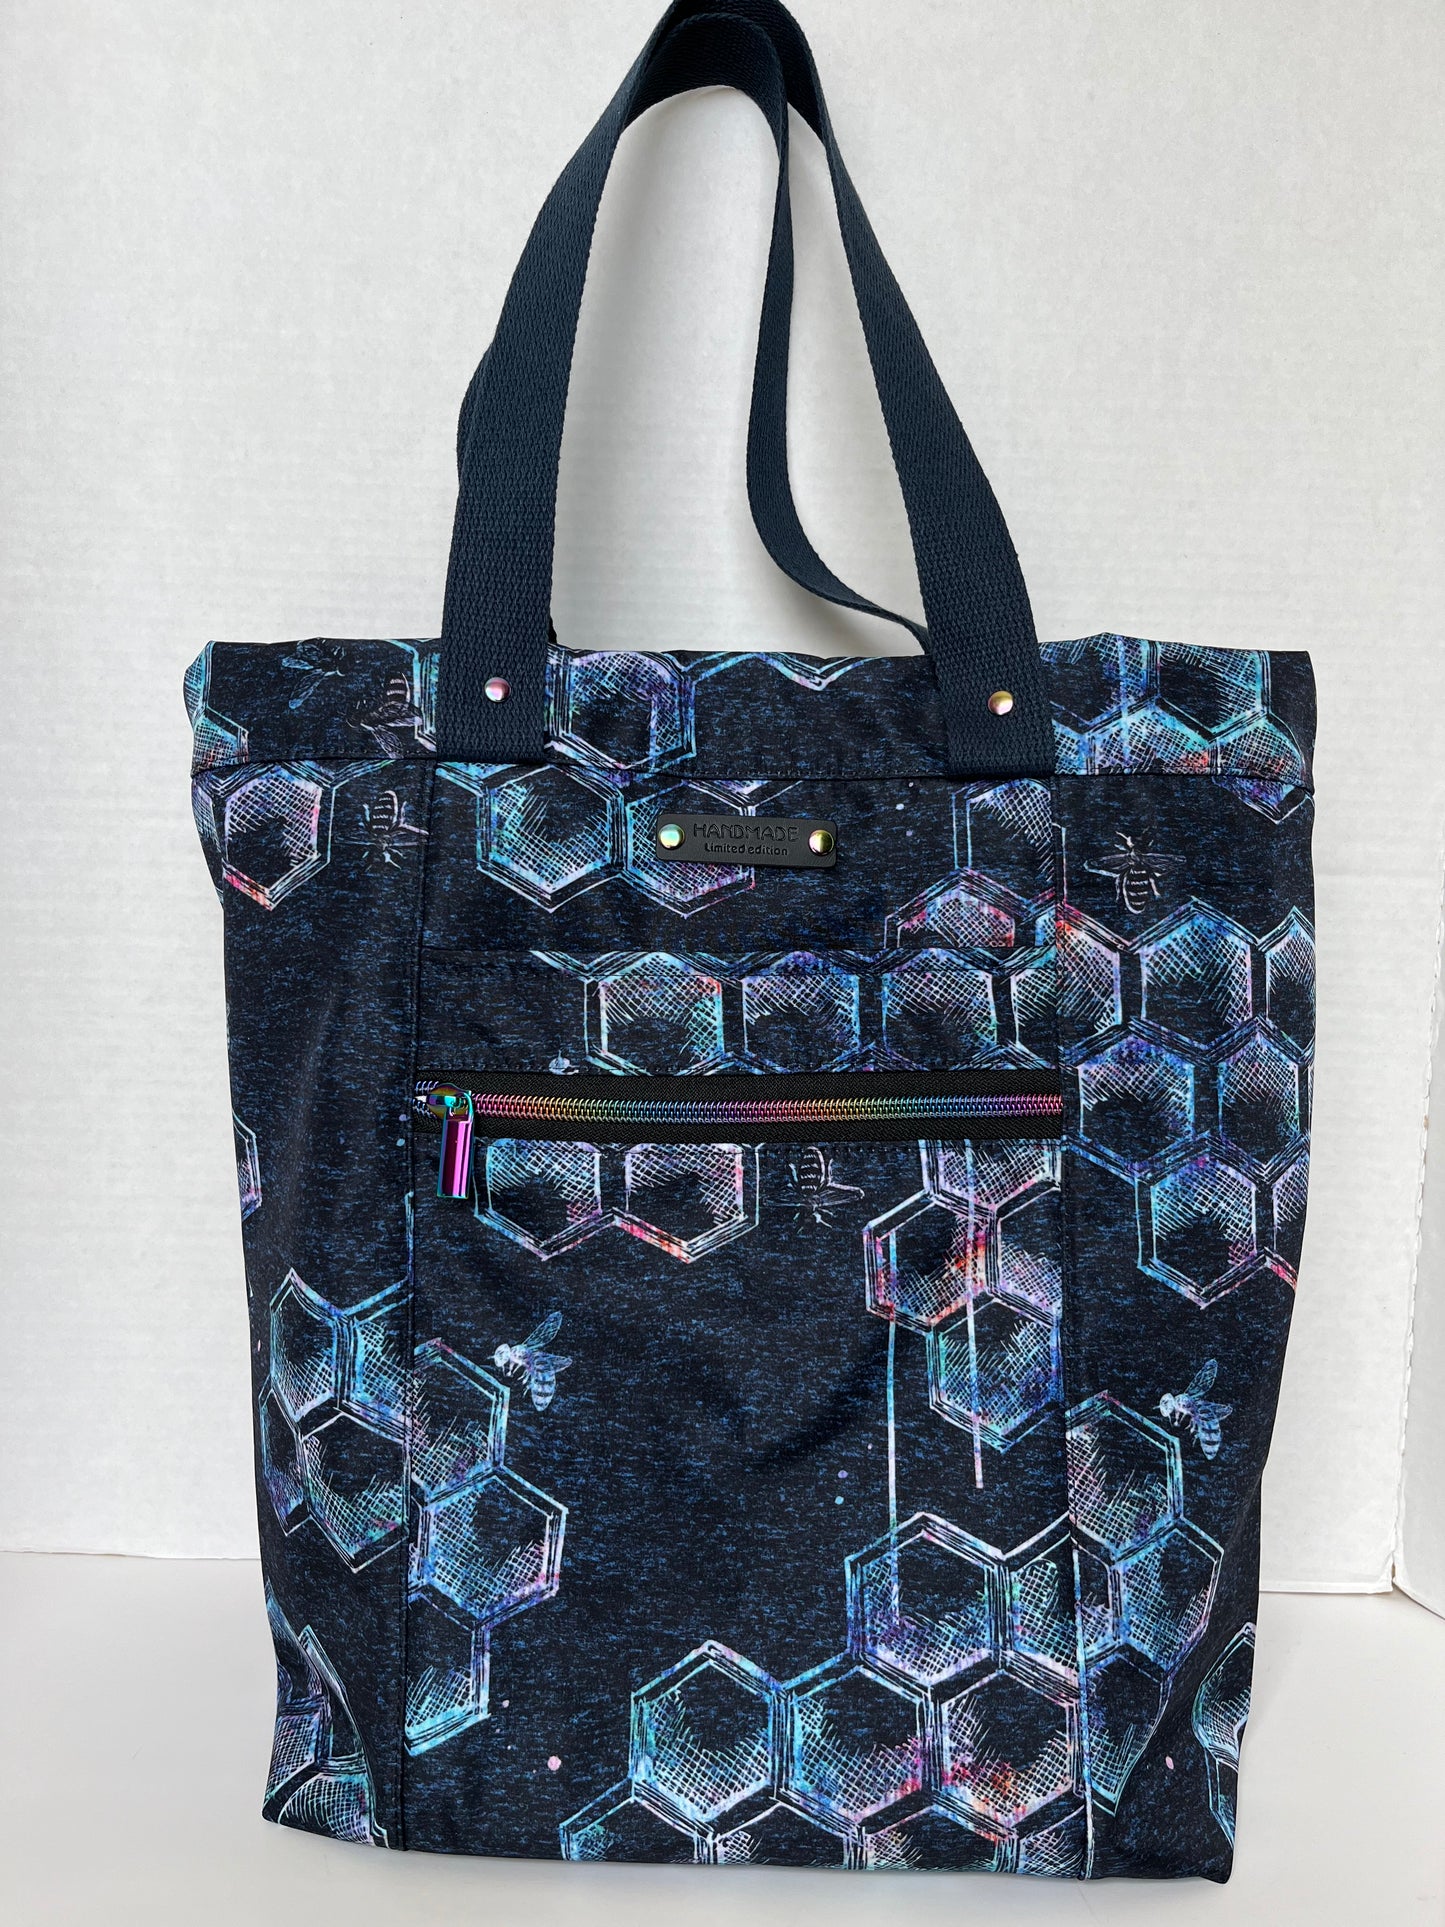 Iridescent Bee Print Water Resistant Tote Bag, Project Bag